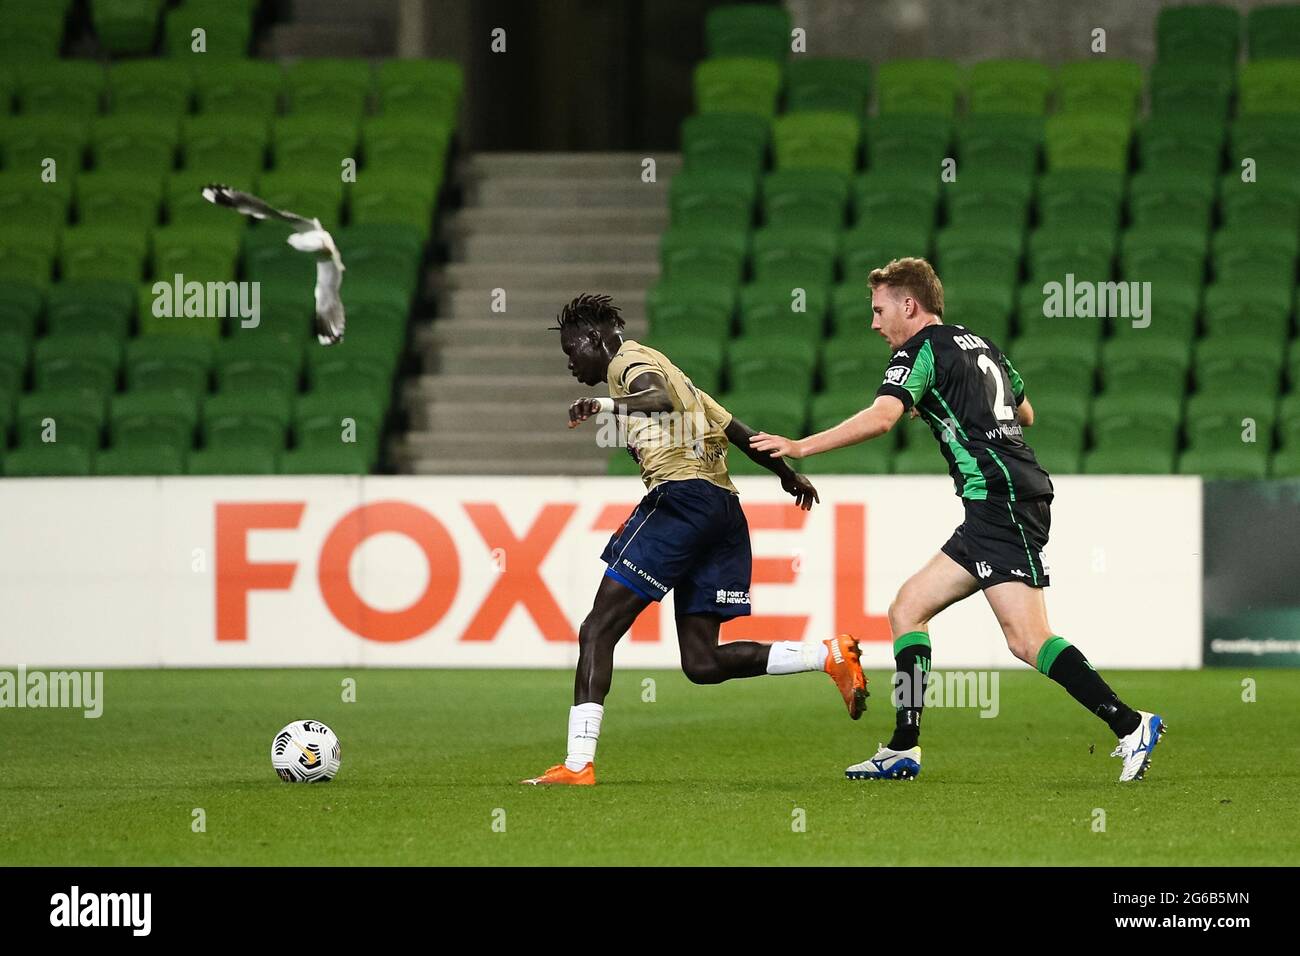 MELBOURNE, AUSTRALIA - APRIL 26: Valentino Yuel of Newcastle Jets controls the ball during the Hyundai A-League soccer match between Western United FC and Newcastle Jets on April, 26, 2021 at AAMI Park in Melbourne, Australia. (Photo by Dave Hewison) Stock Photo